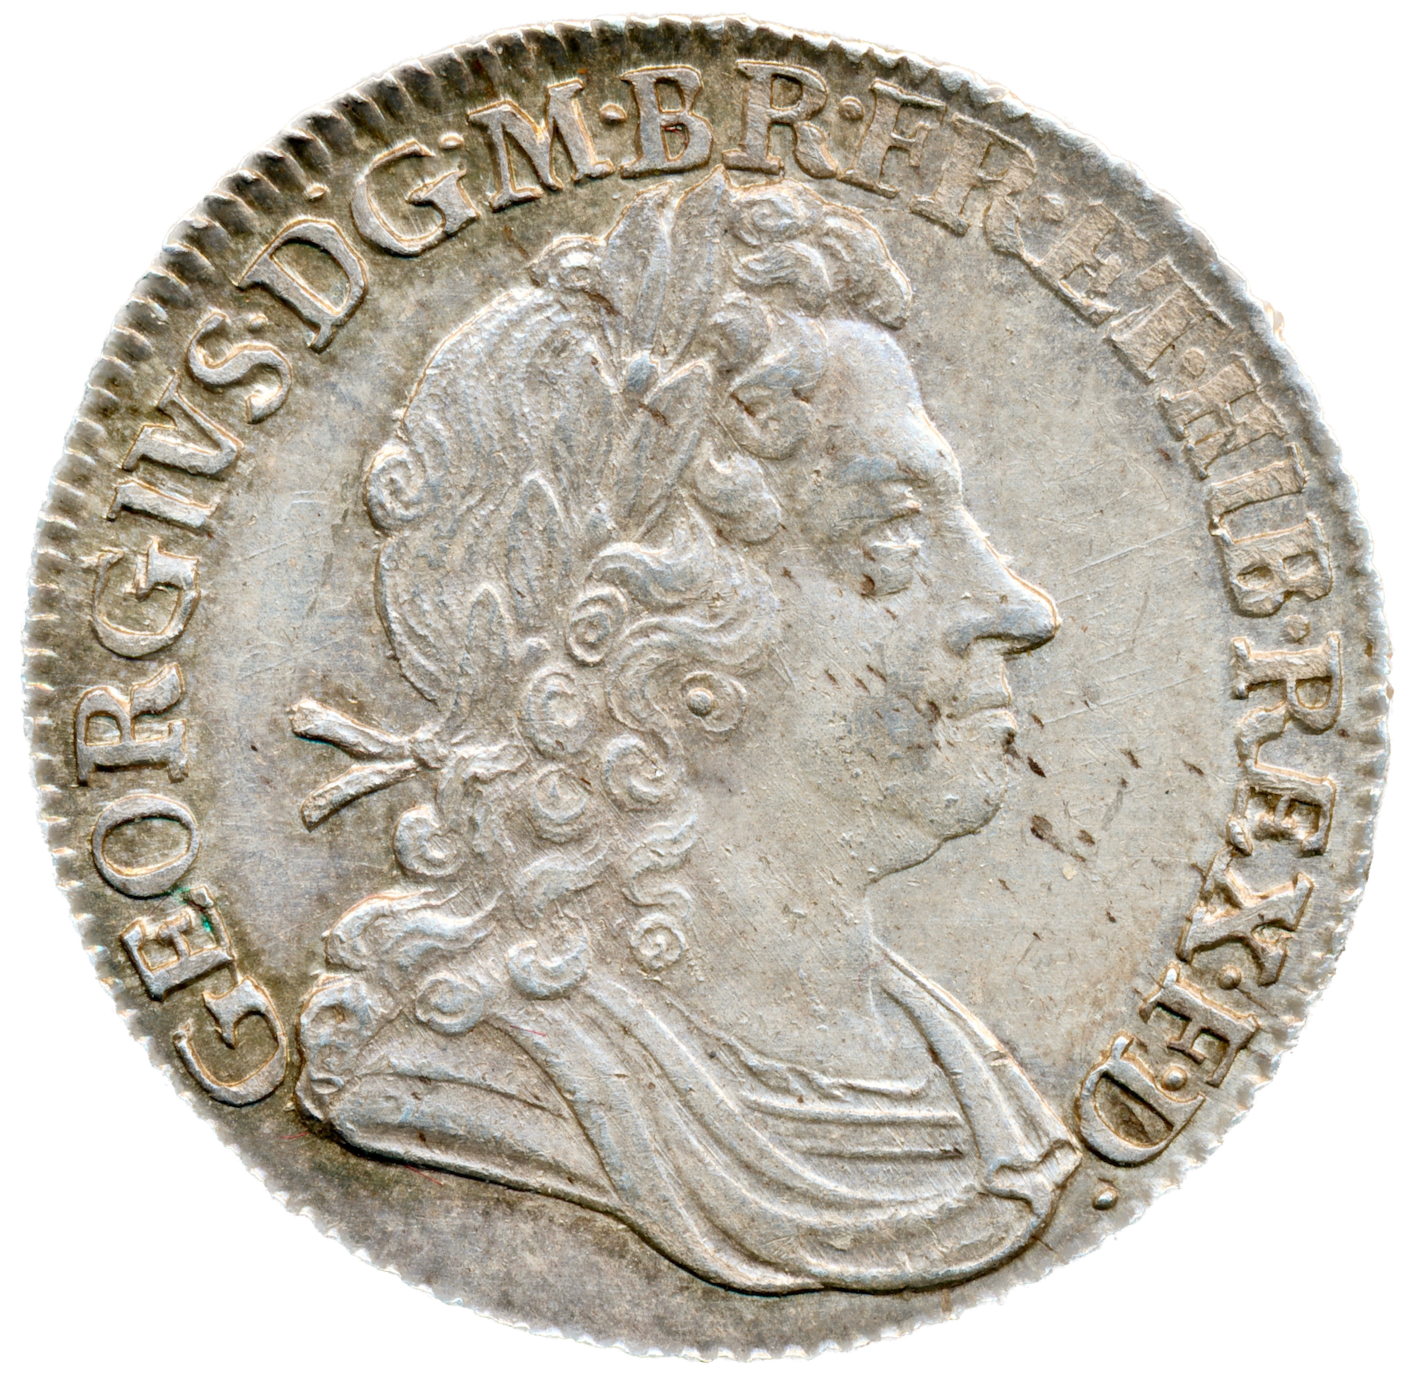 1723 Shilling First bust SSC C over SS in third quarter S3647 ESC 1590 Rare GEF